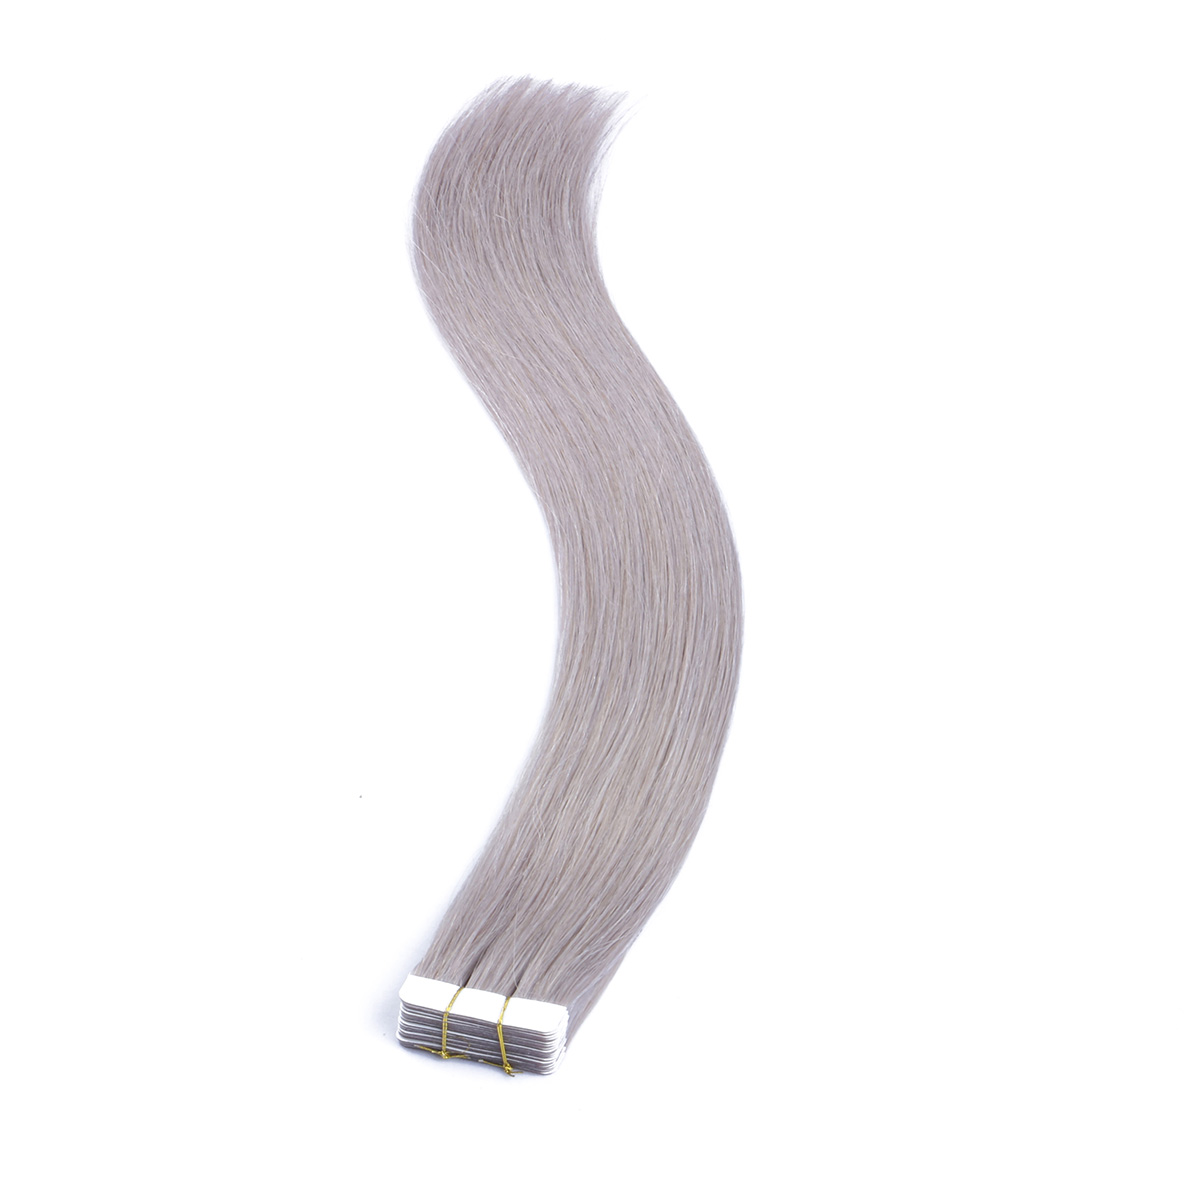 Custom Skin Wefts Human Hair Extension Supplier Grey Color Tape in Hair Extension